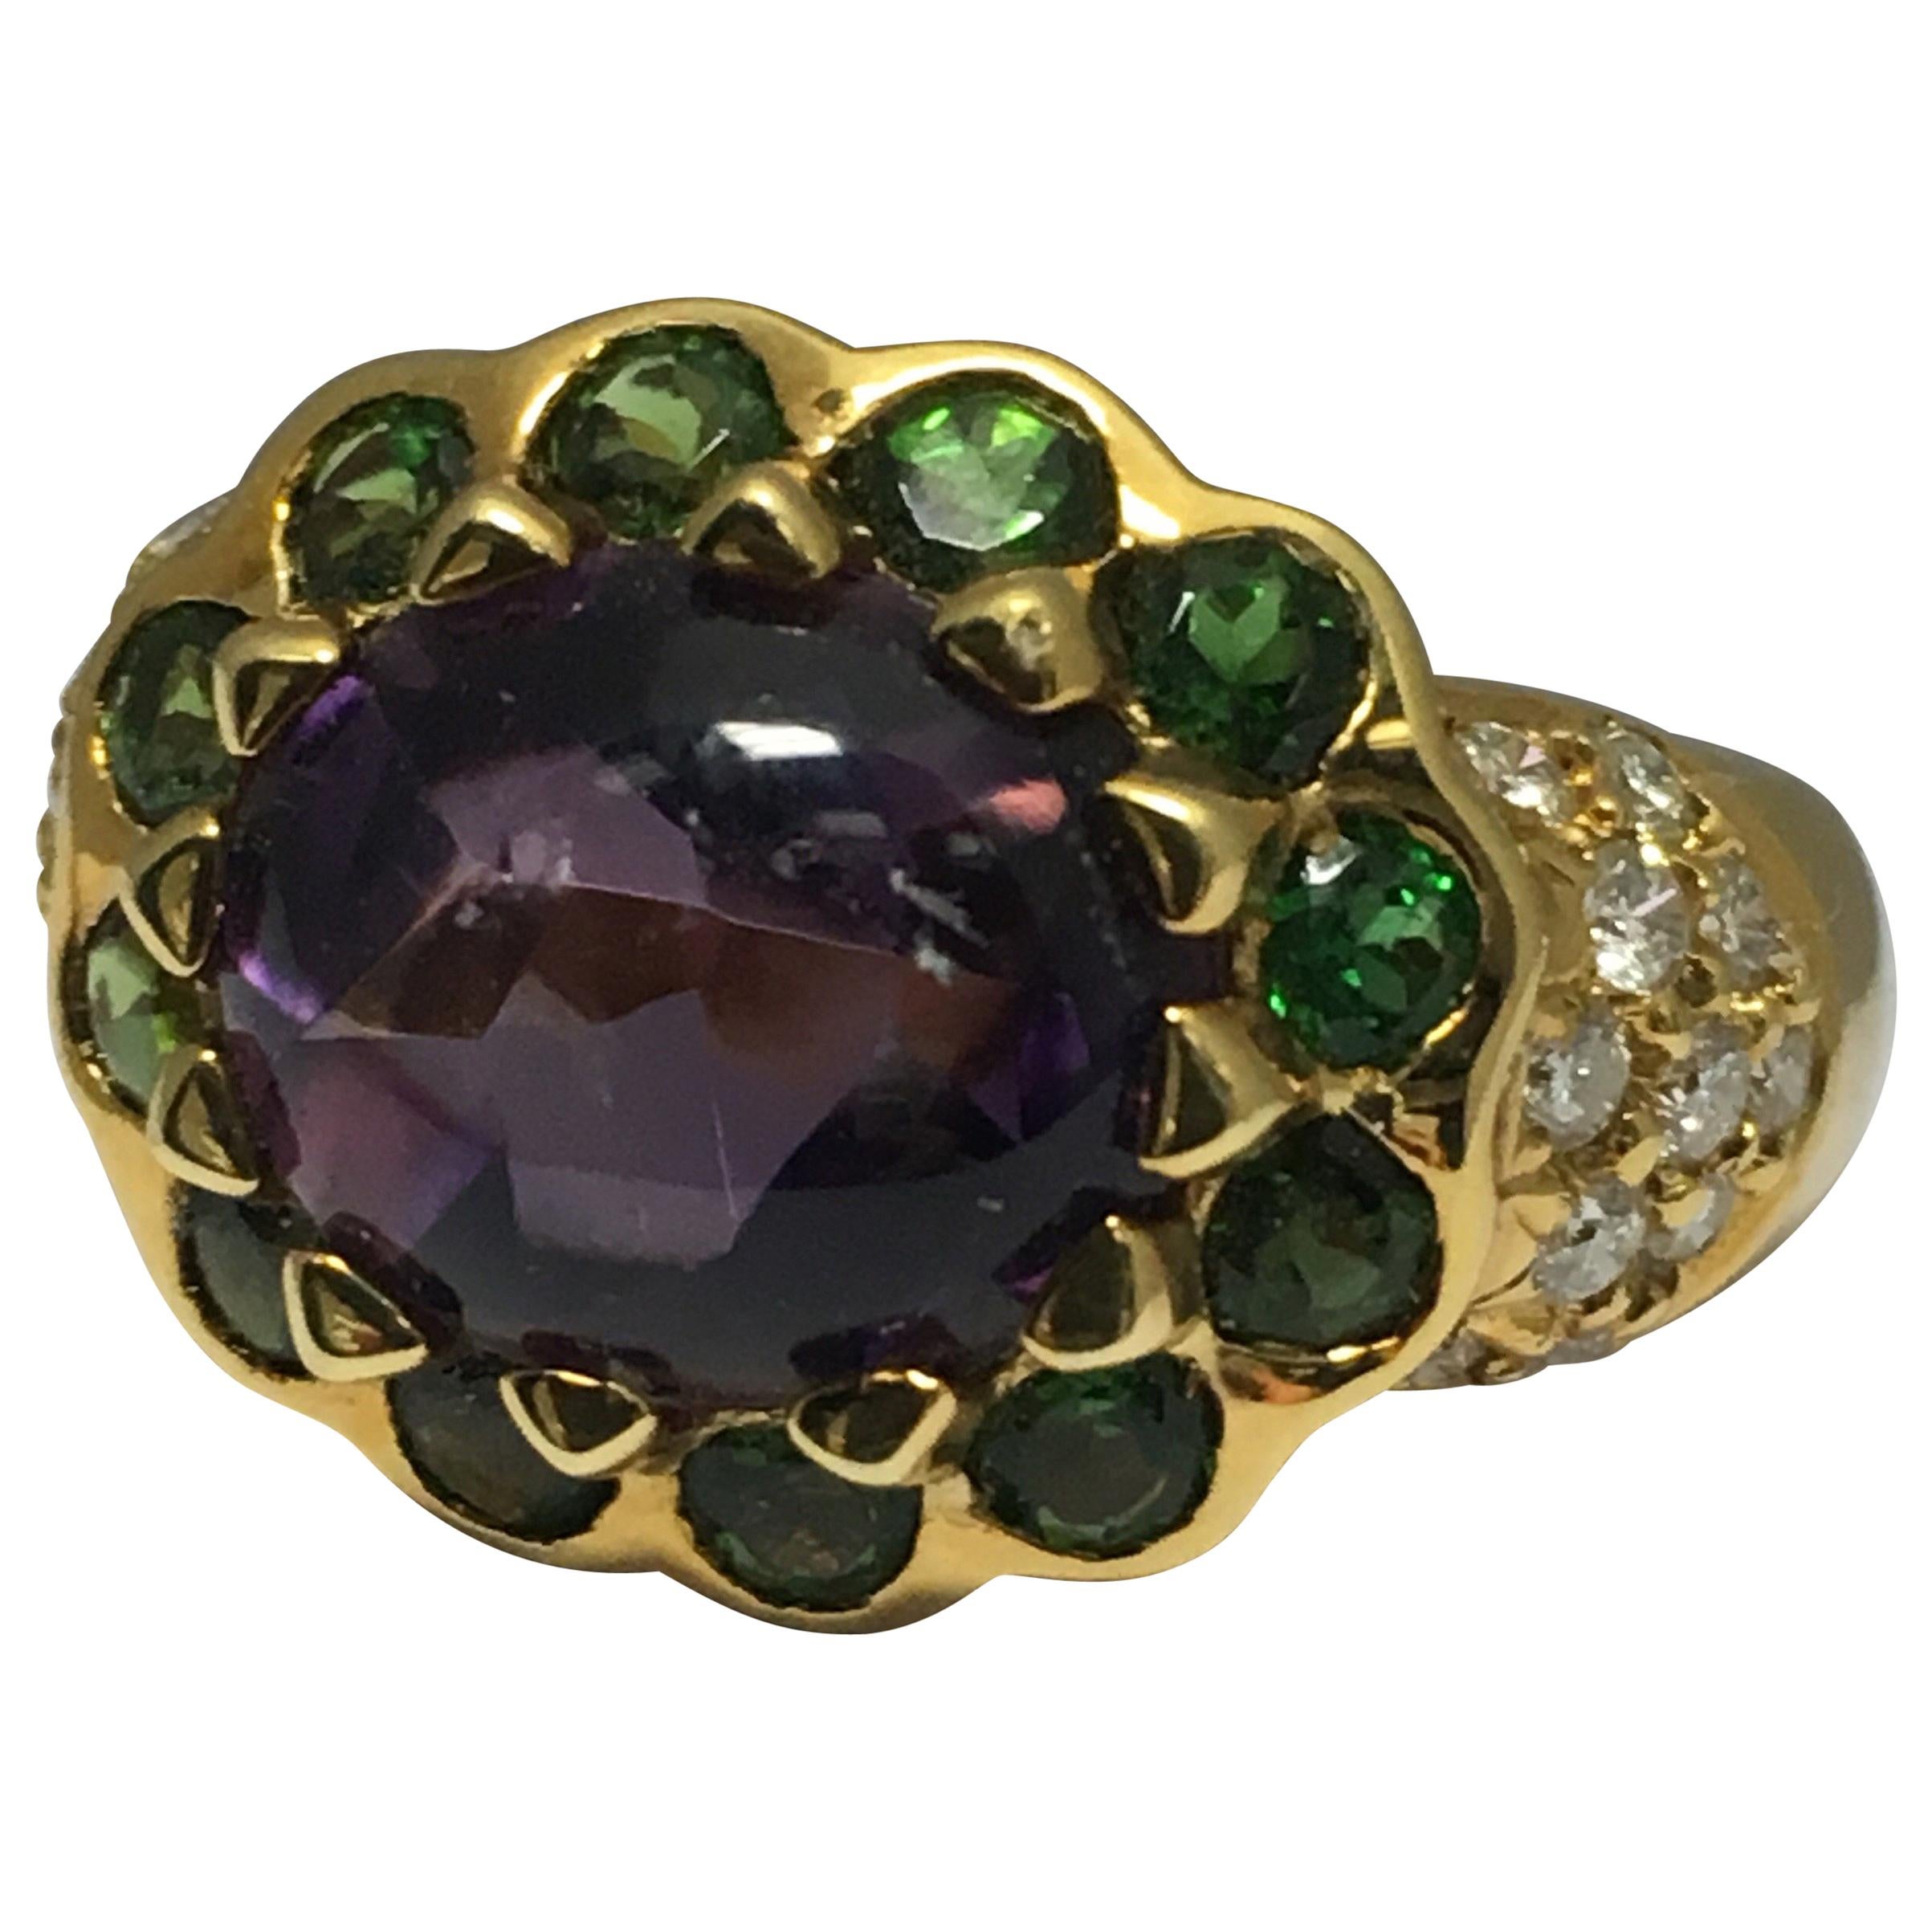 Amethyst, Green Tourmaline and Diamond Ring Set in 18KT yellow Gold #21-12003 For Sale